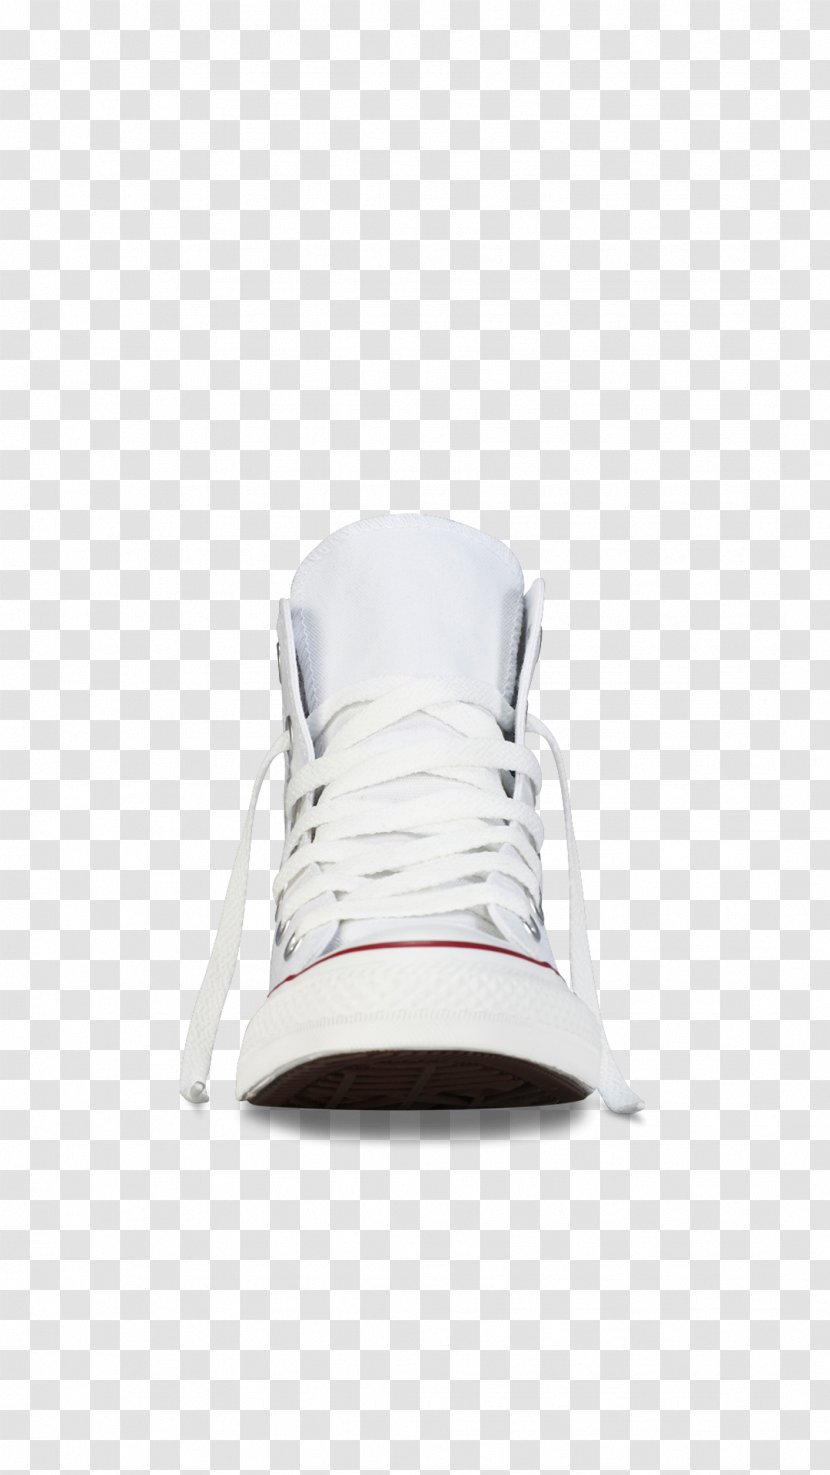 Sneakers Chuck Taylor All-Stars Converse Plimsoll Shoe - Nike Transparent PNG